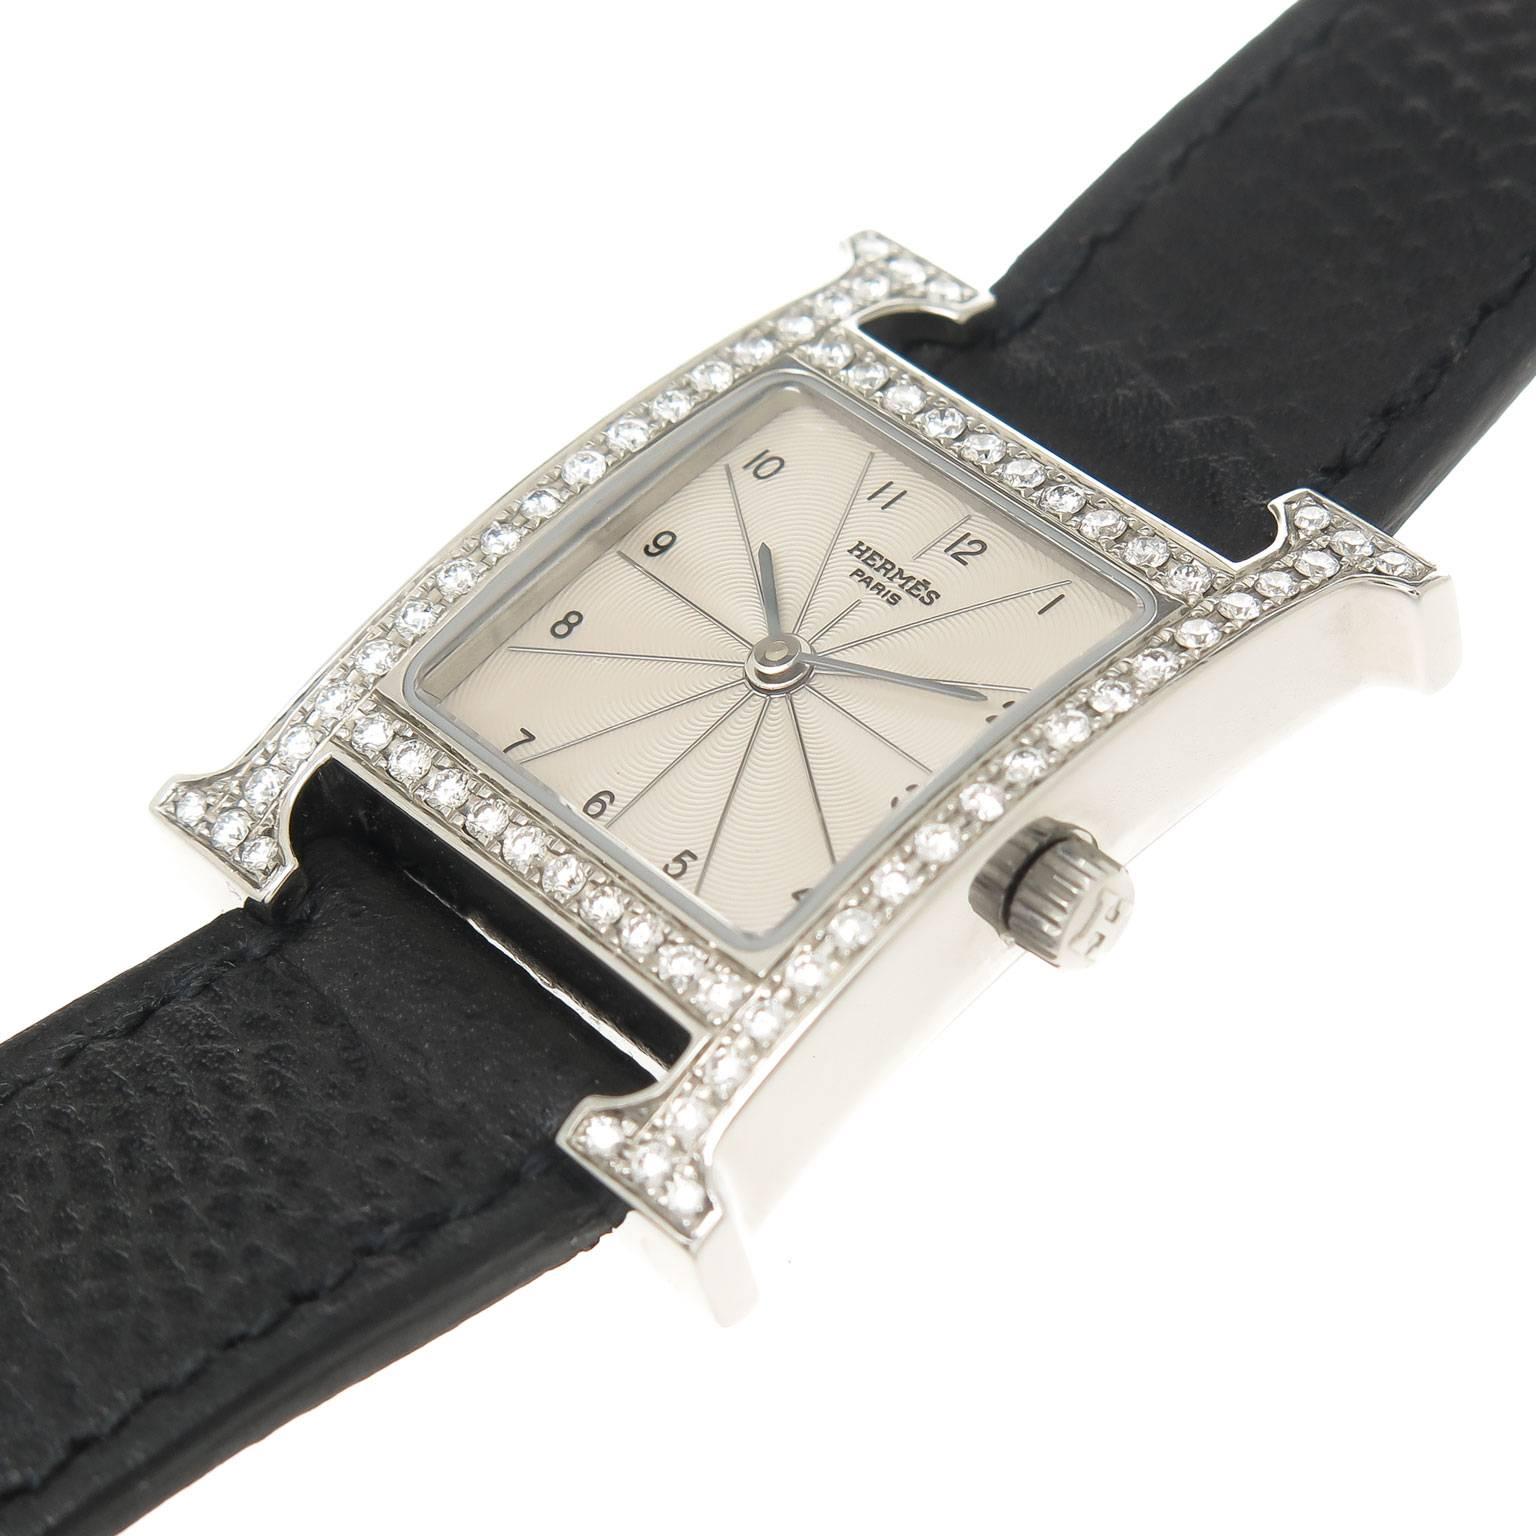 Circa 2010 Hermes "H" Hour Ladies Wrist watch, 30 X 21 MM stainless steel case, Quartz Movement, Silvered Engine turned Guilloche Dial with Raised Markers. Factory Diamond set Bezel of Round Brilliant cut Diamonds totaling 1.20 Carat.